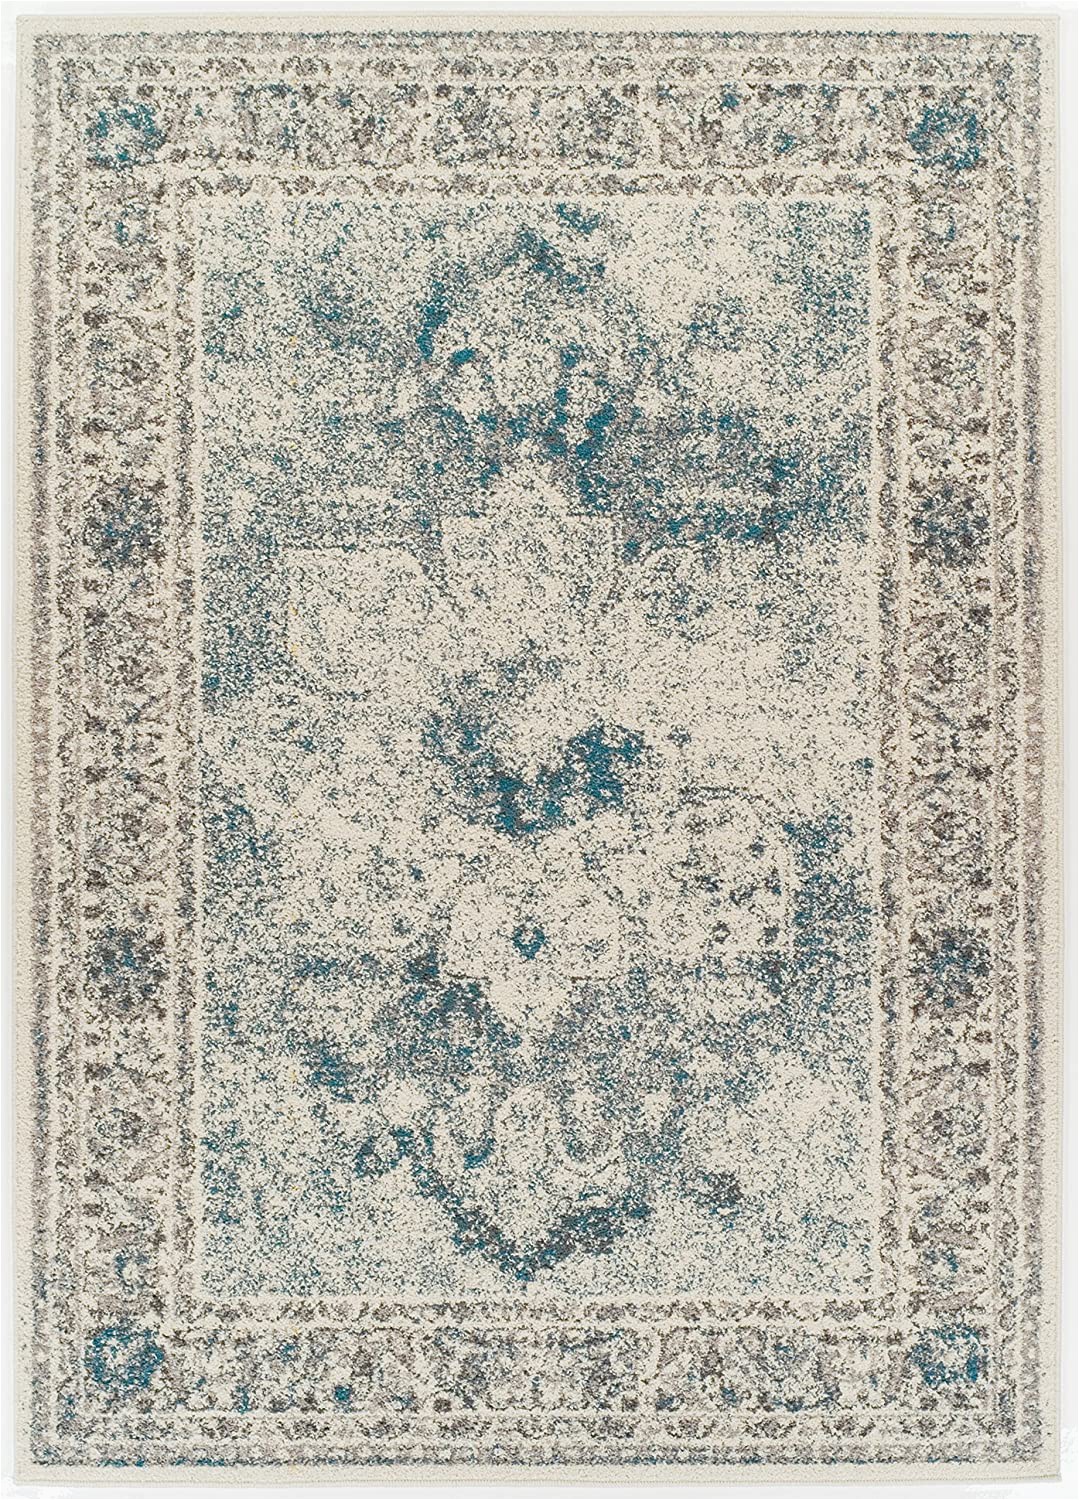 Small Blue area Rugs Traditional Distressed area Rugs 2×3 Door Mat Indoor Blue Small Rugs for Bedrooms and Bathroom